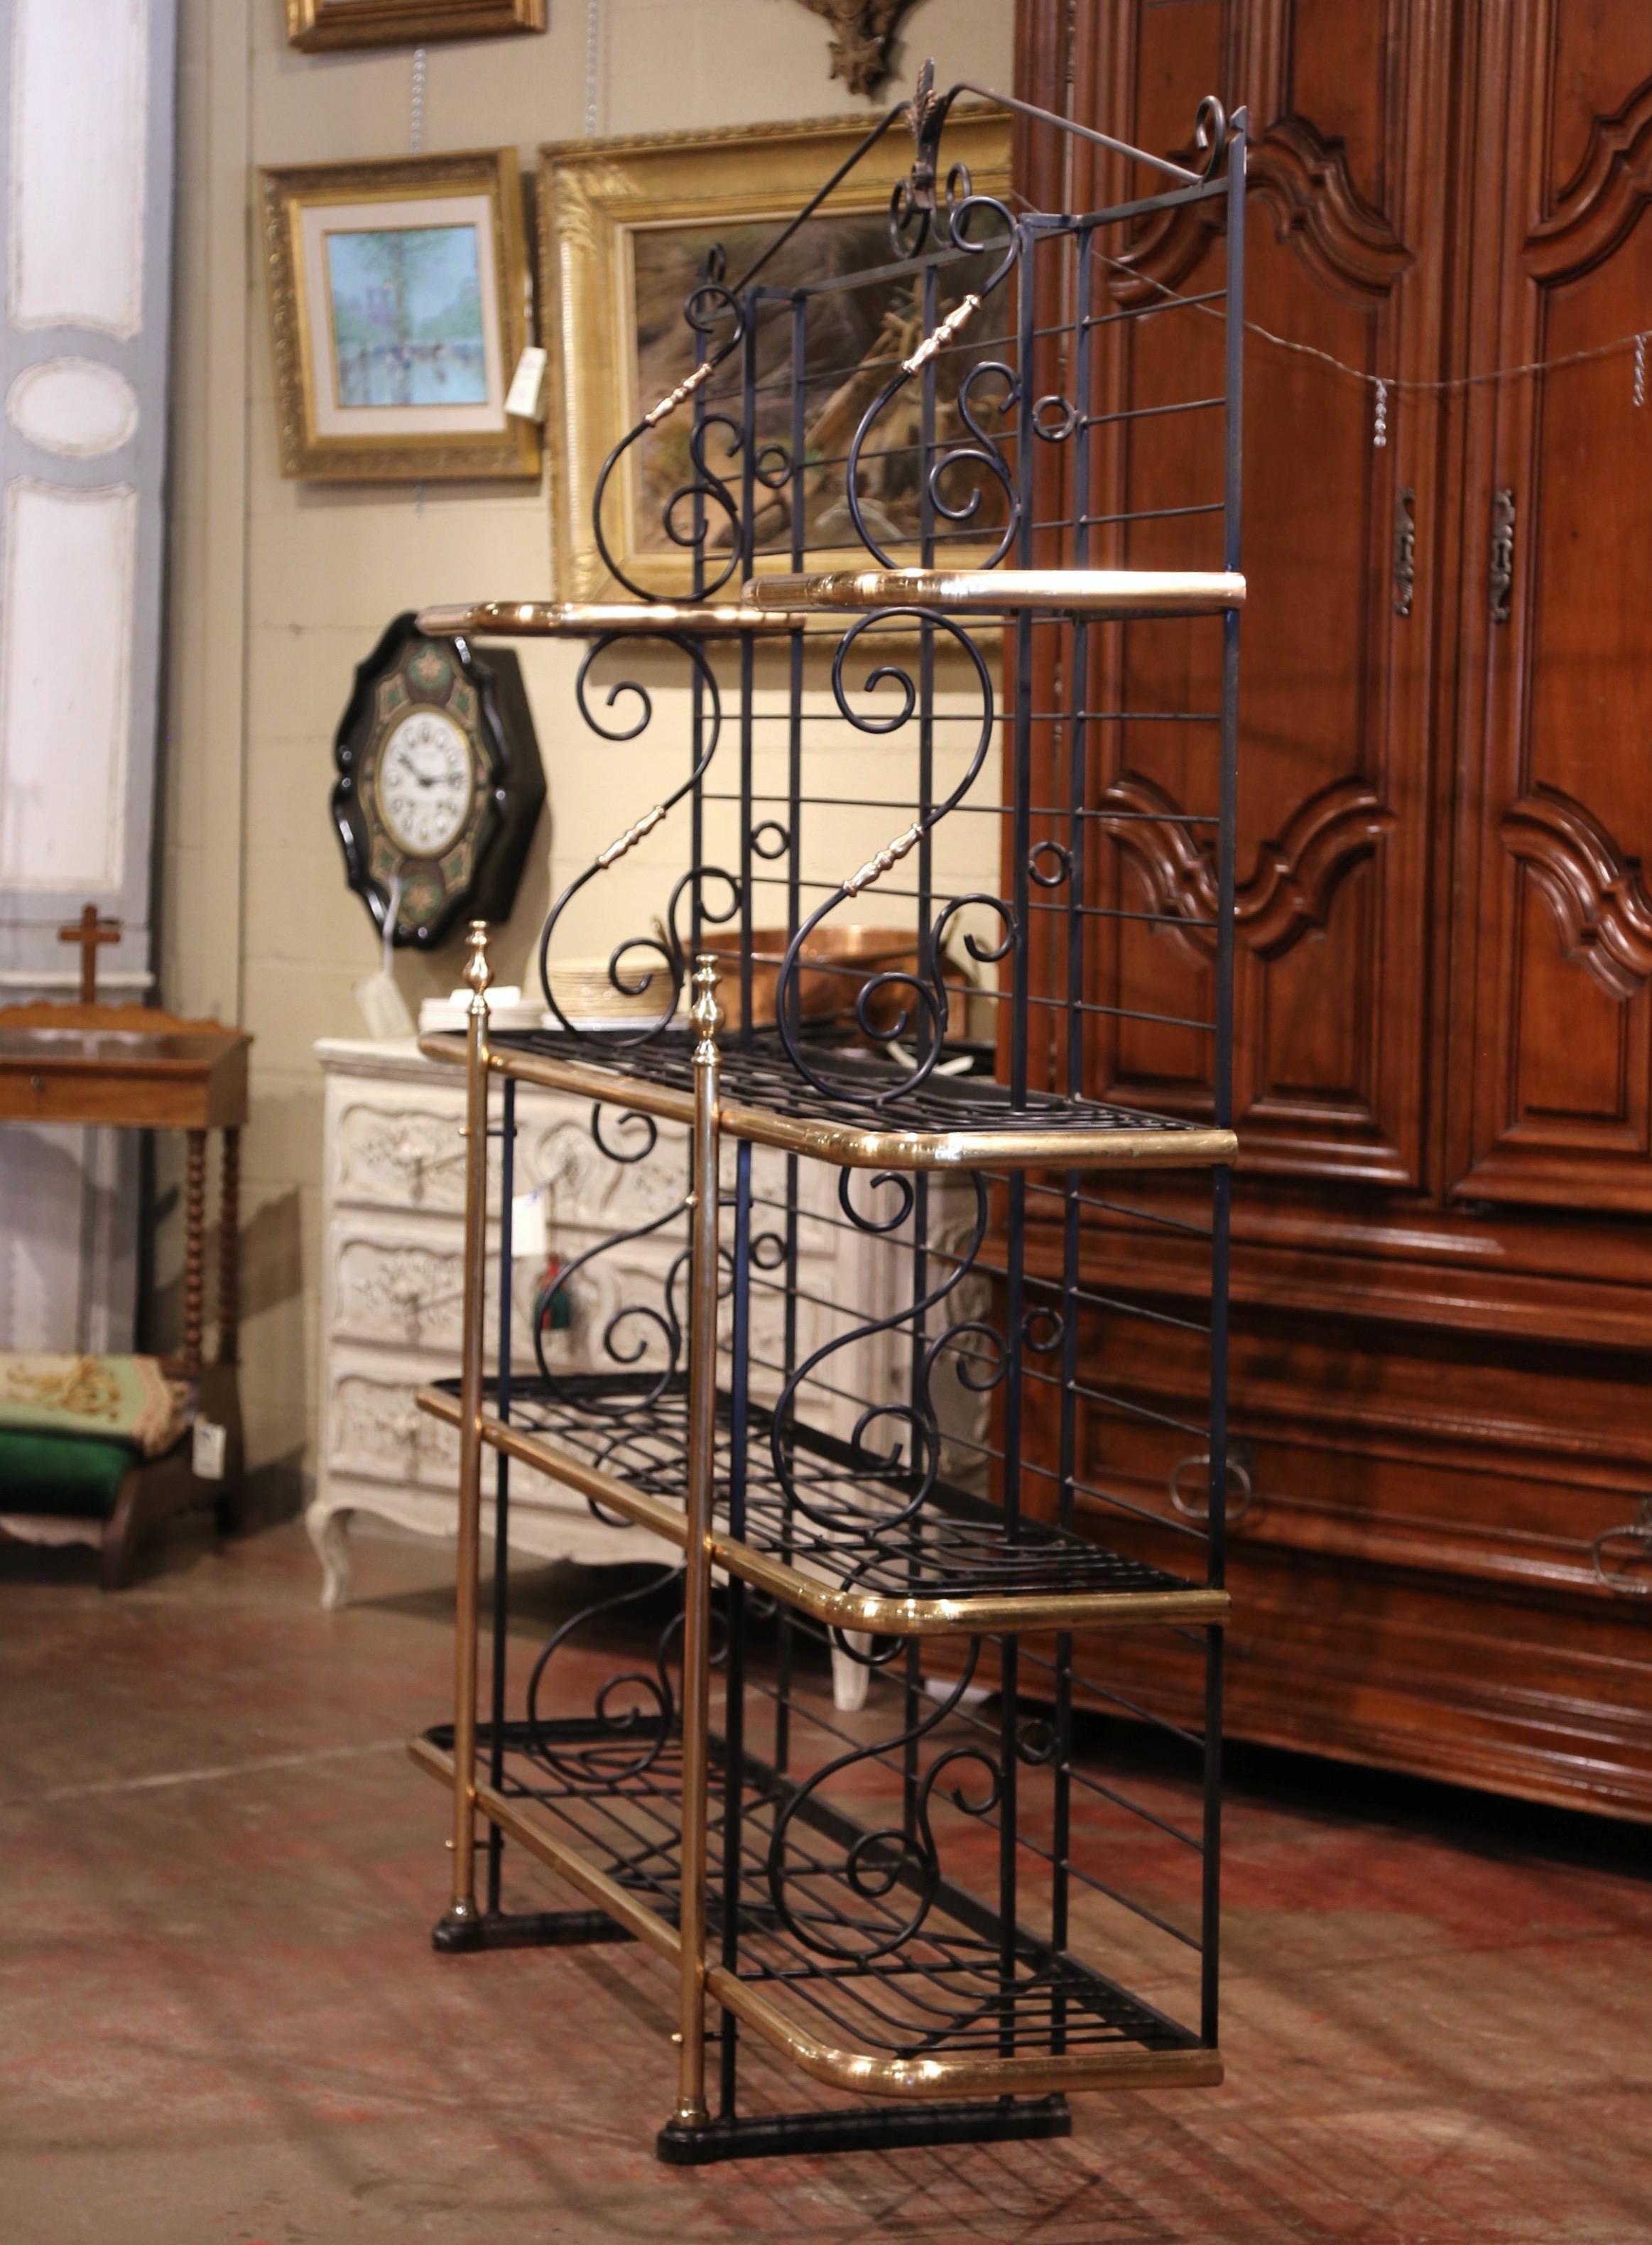 Display your Majolica collection, cooking books, or other accessories on this elegant antique Parisian Boulangerie rack; crafted circa 1930, the wide shelf made primarily of iron, features decorative brass columns and edging shelf trim, bronze